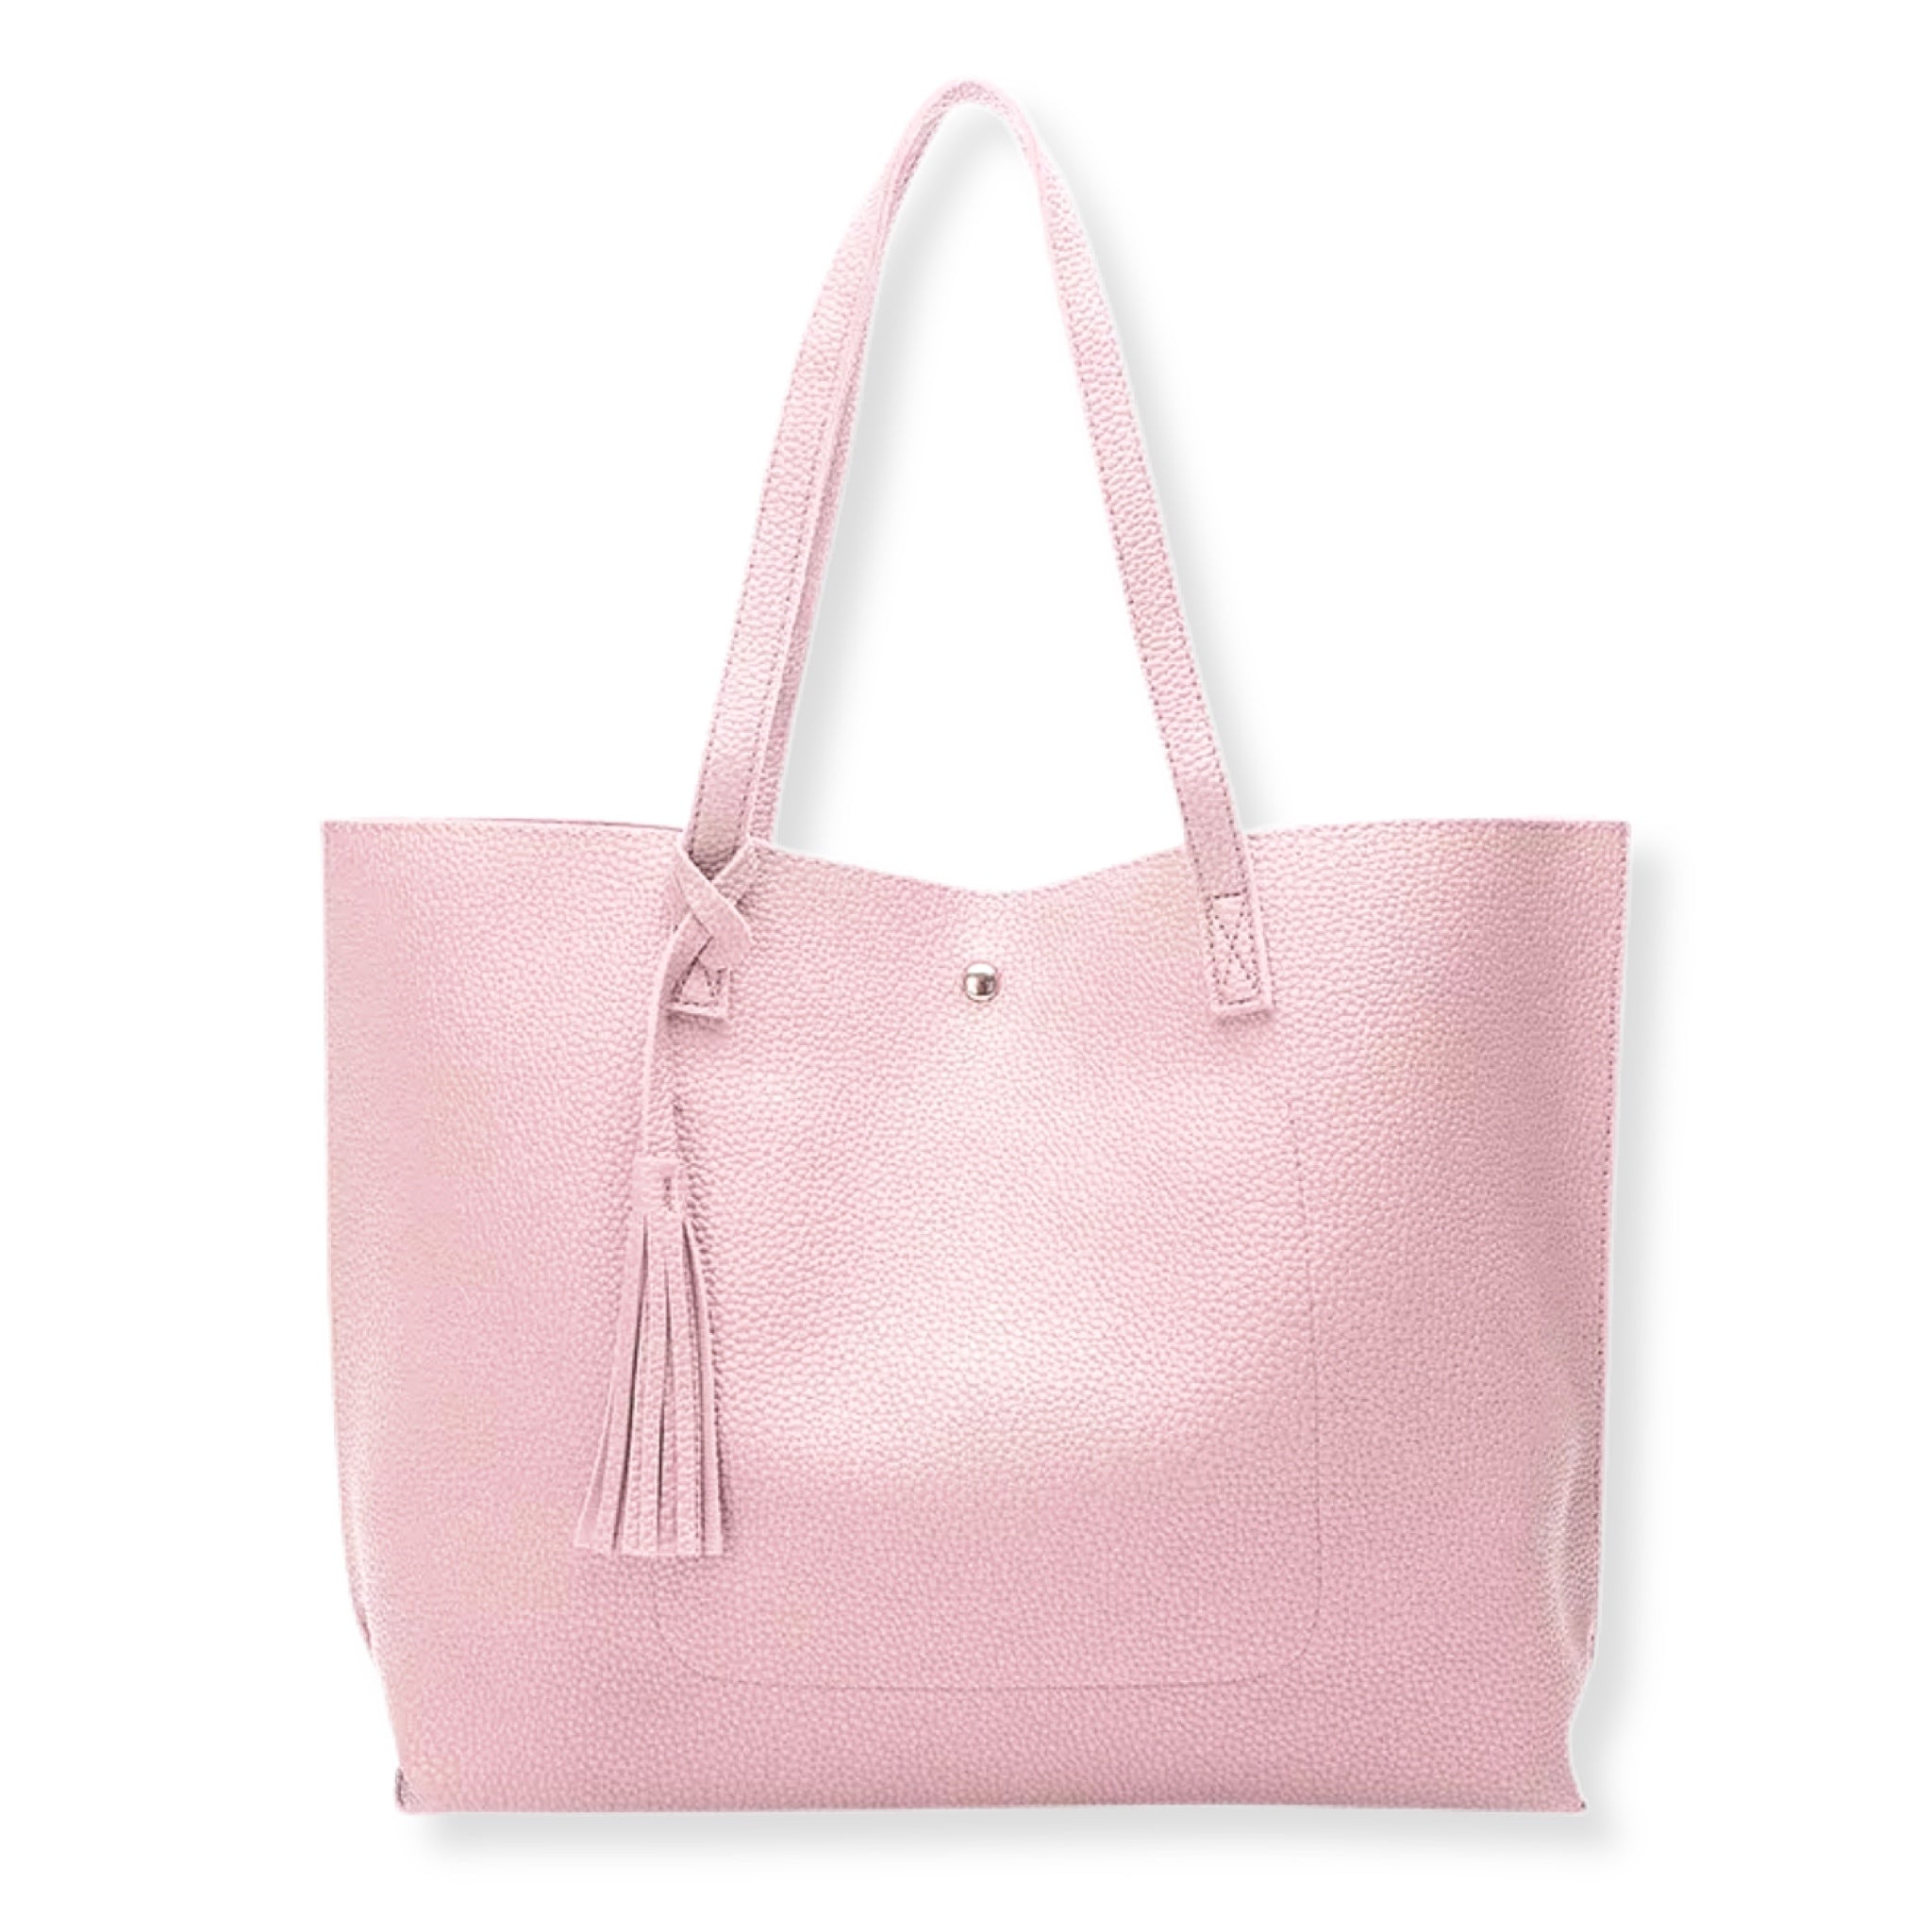 Chic Work Tote